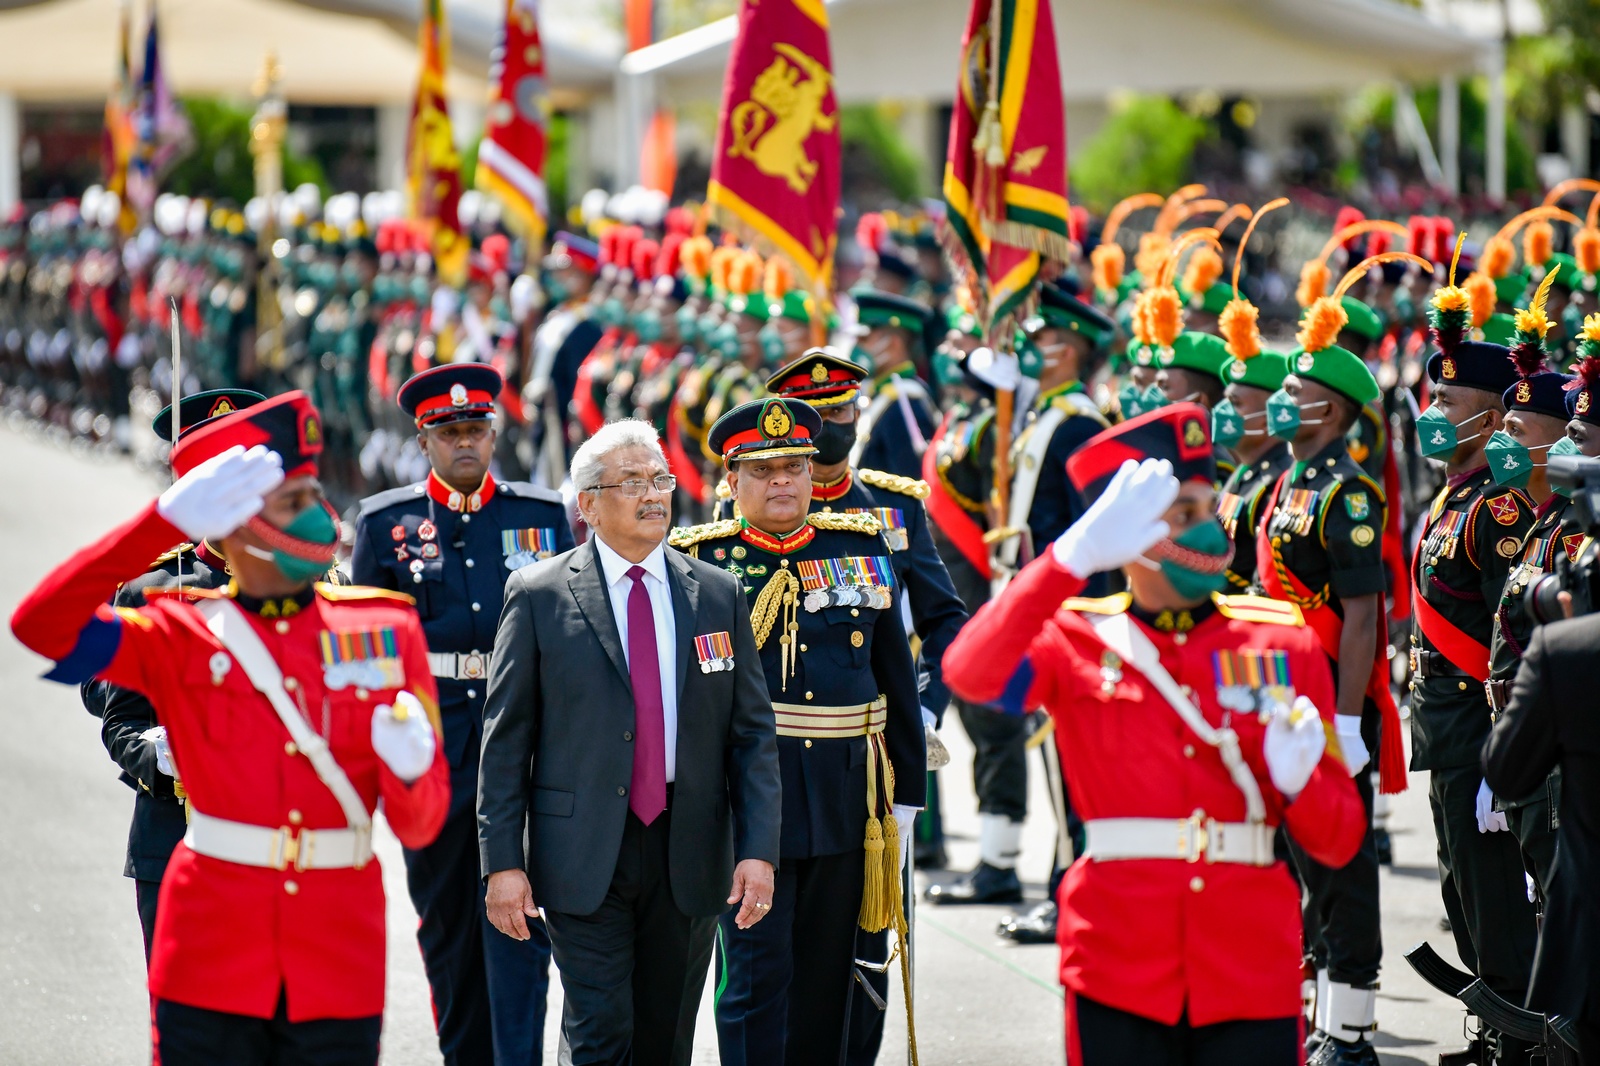 The speech delivered by the President at the 72nd Army Day Celebration